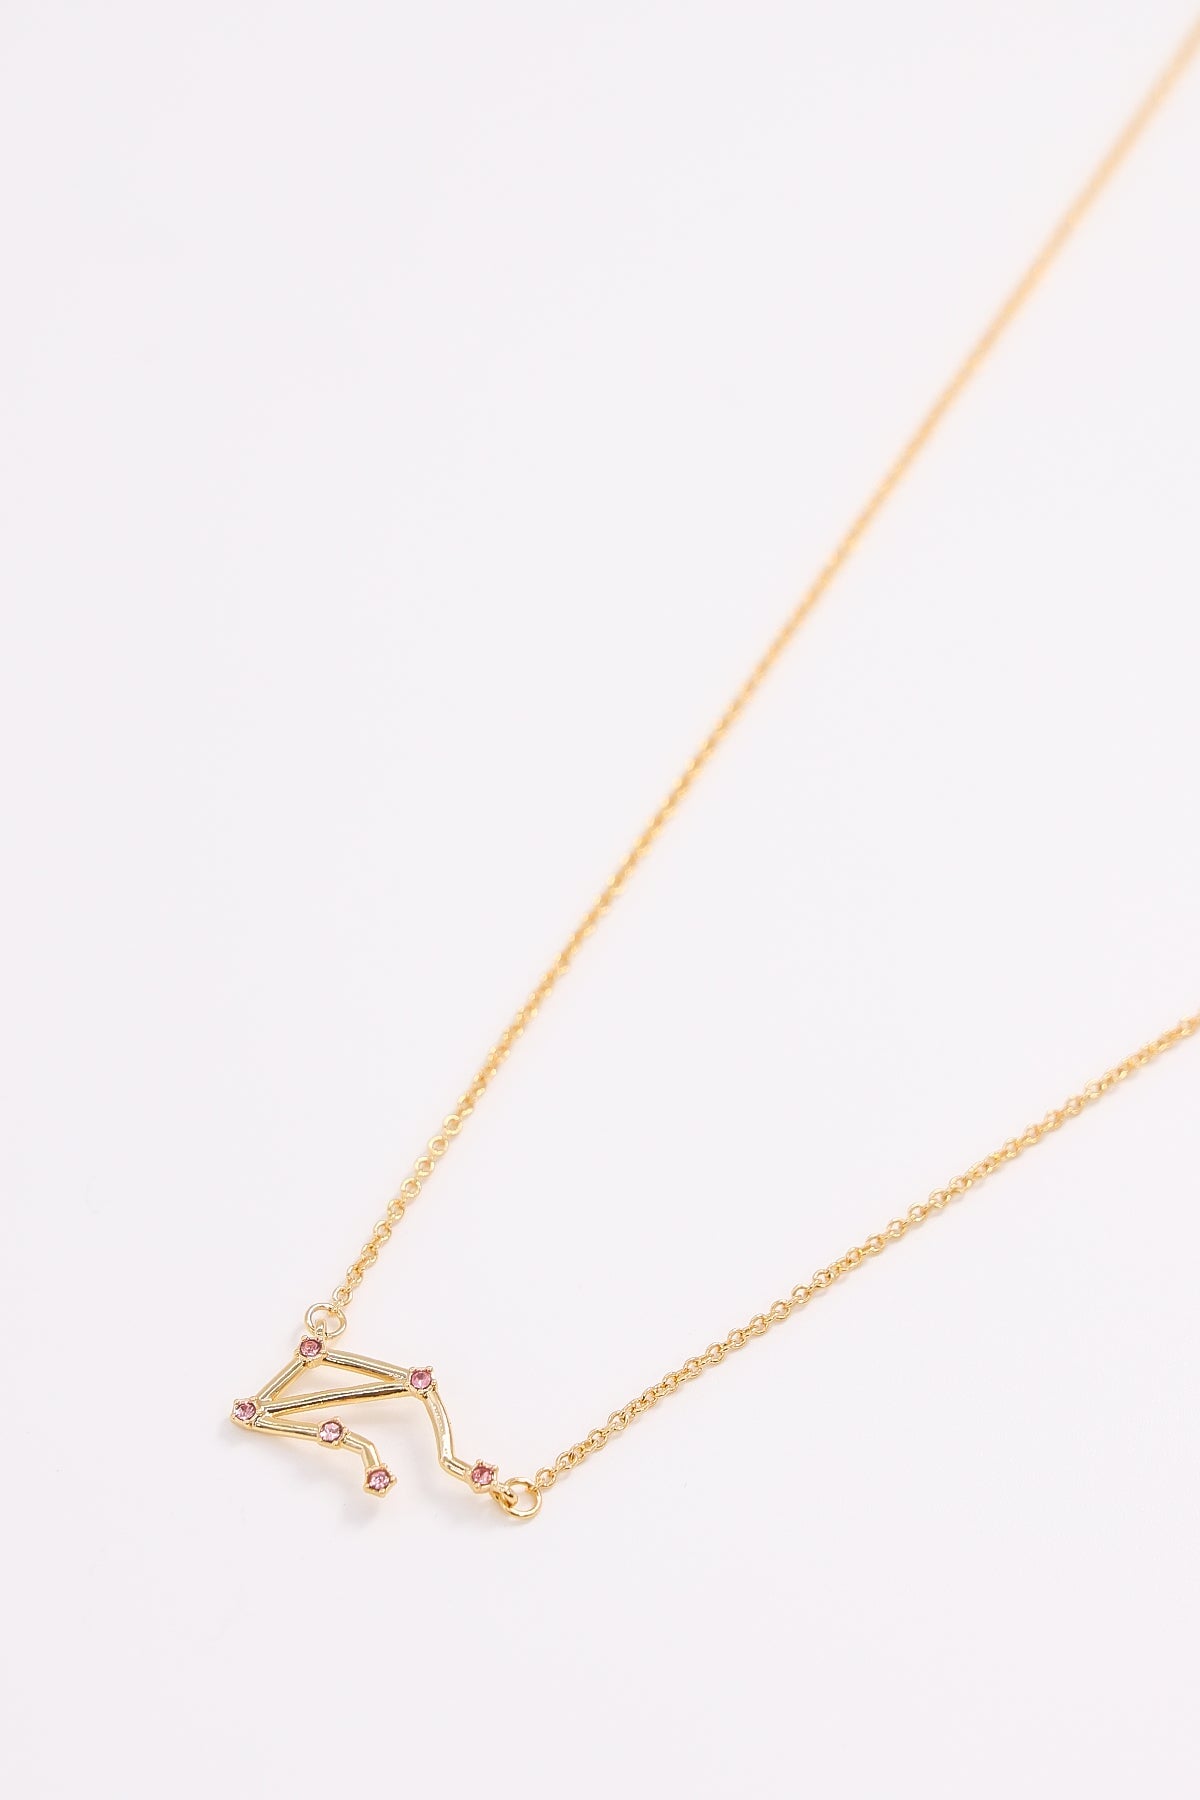 Libra celestial zodiac necklace, exclusively at 12th HOUSE